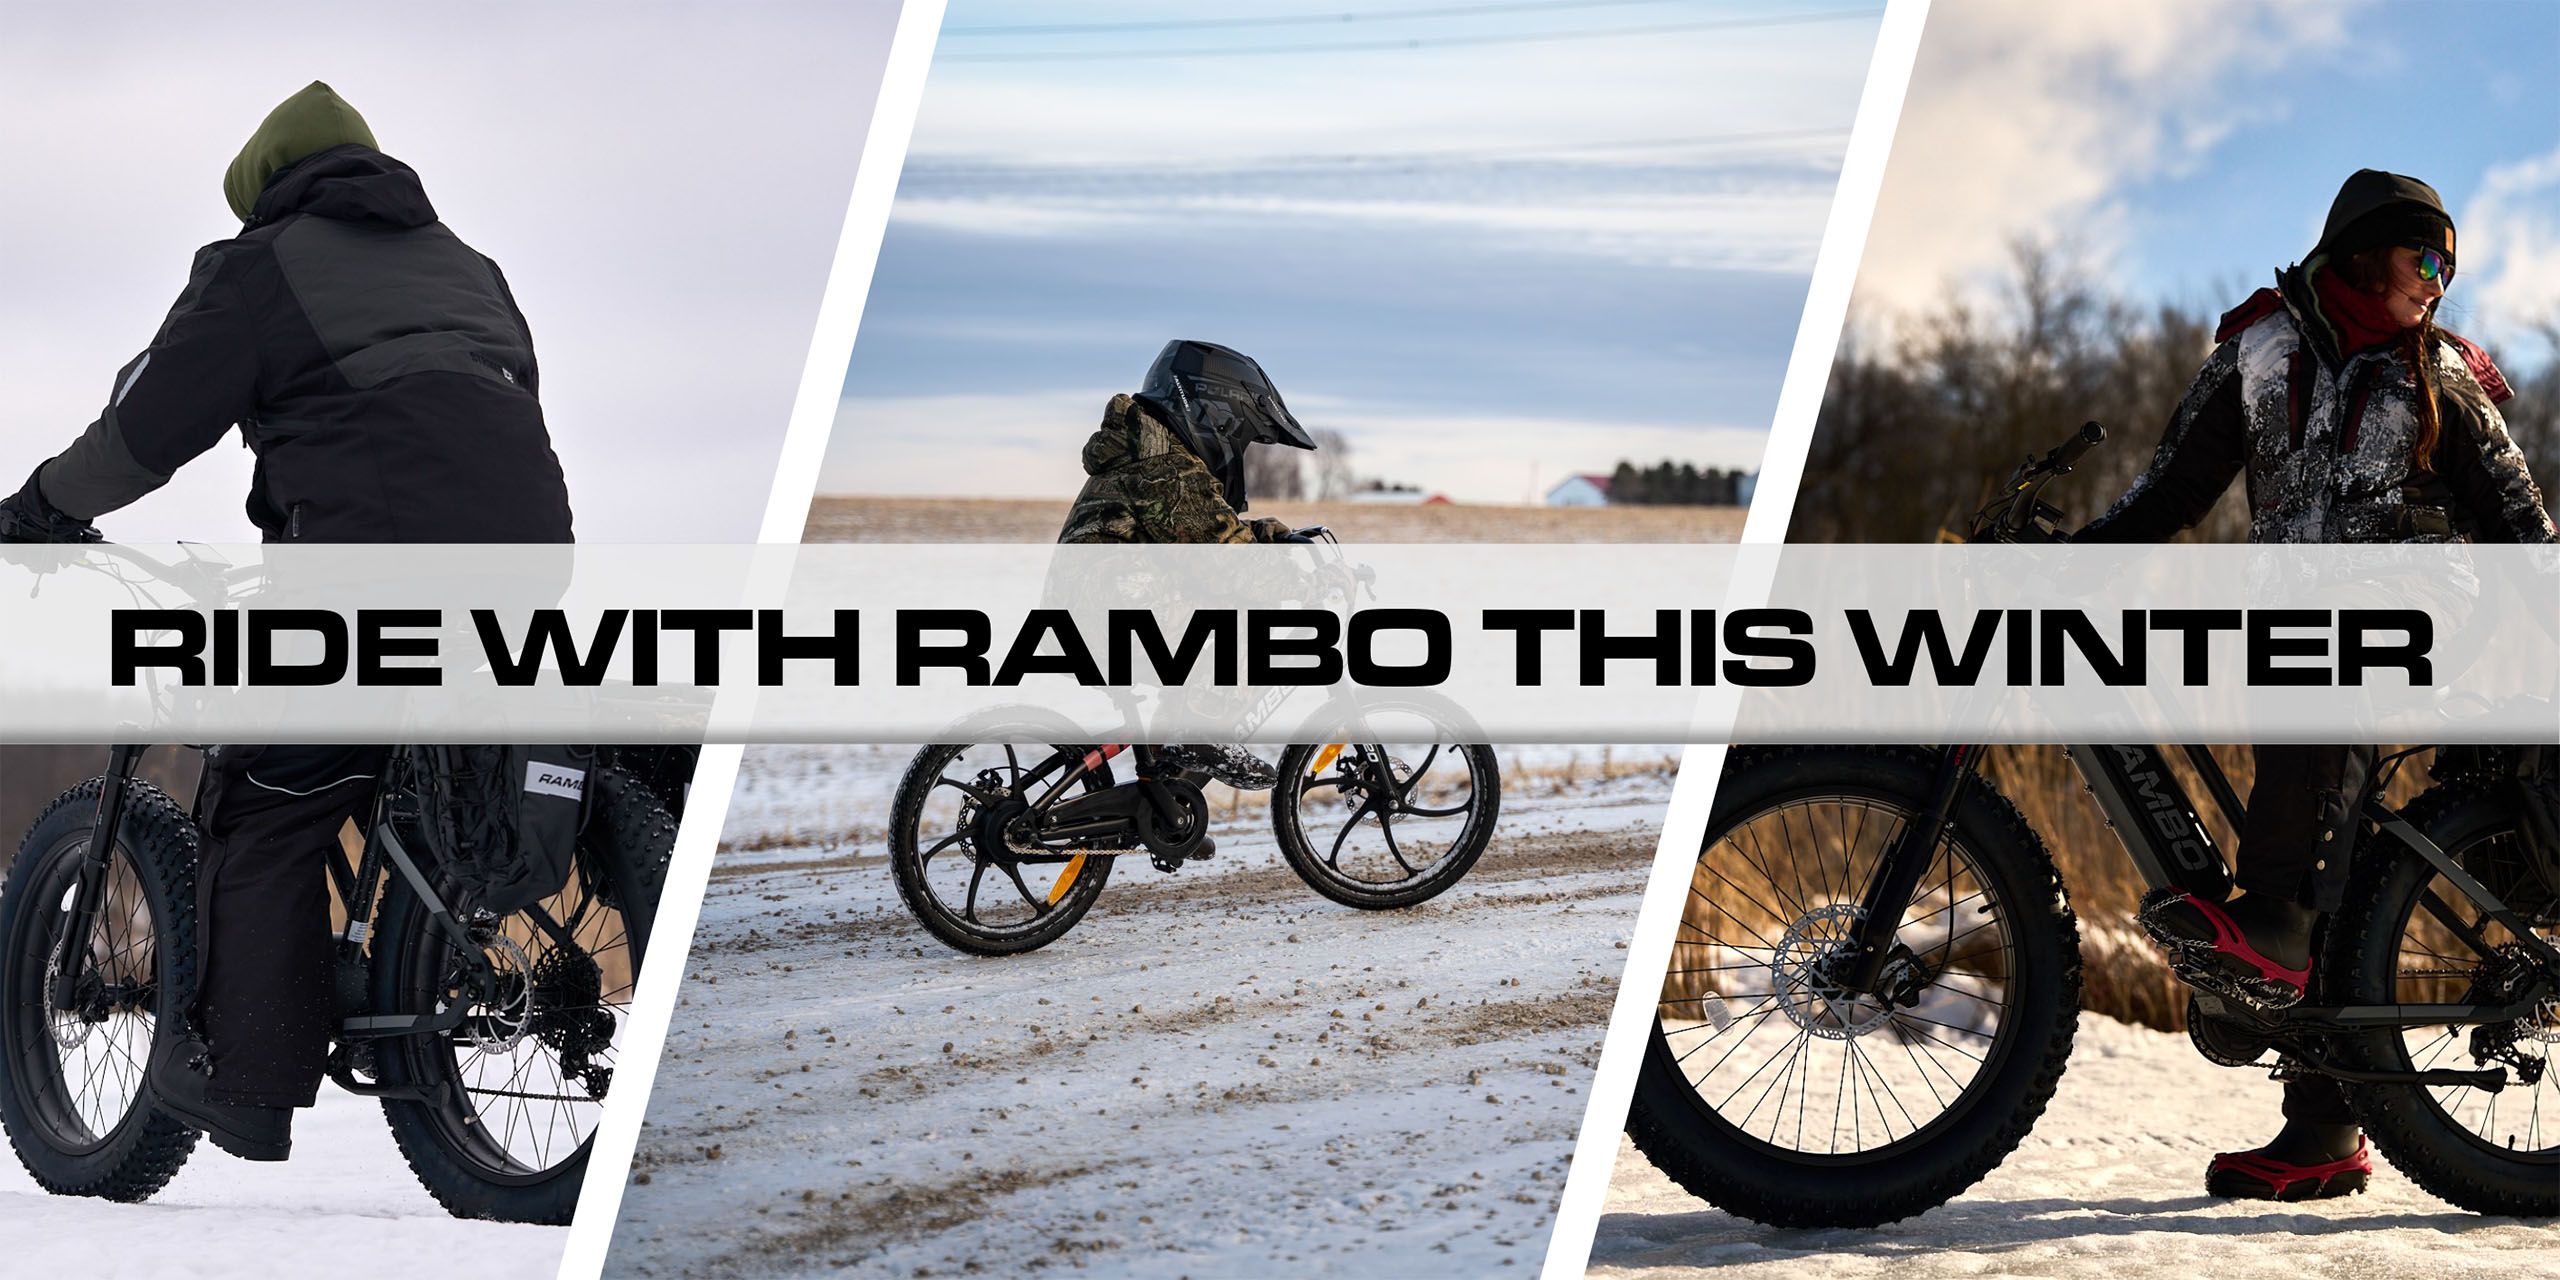 Ride With Rambo this winter graphic